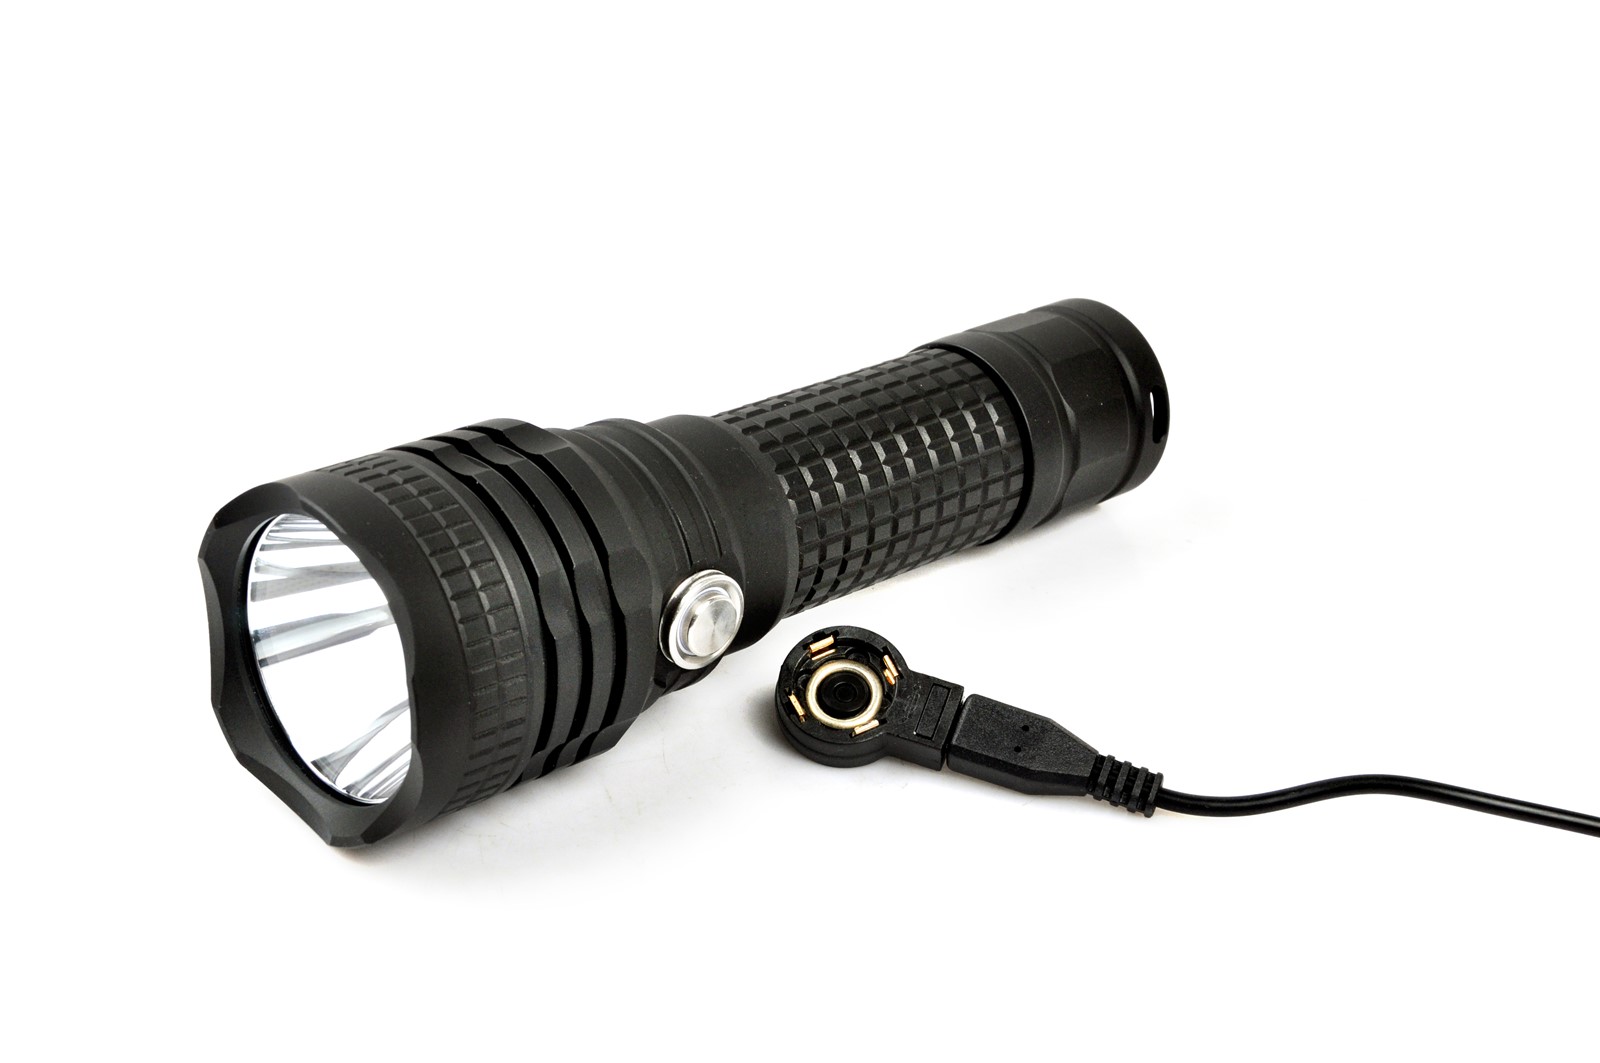 Newest Design High Quality Assured 600lumens Zoomable LED Light USB Rechargeable LED Flashlight